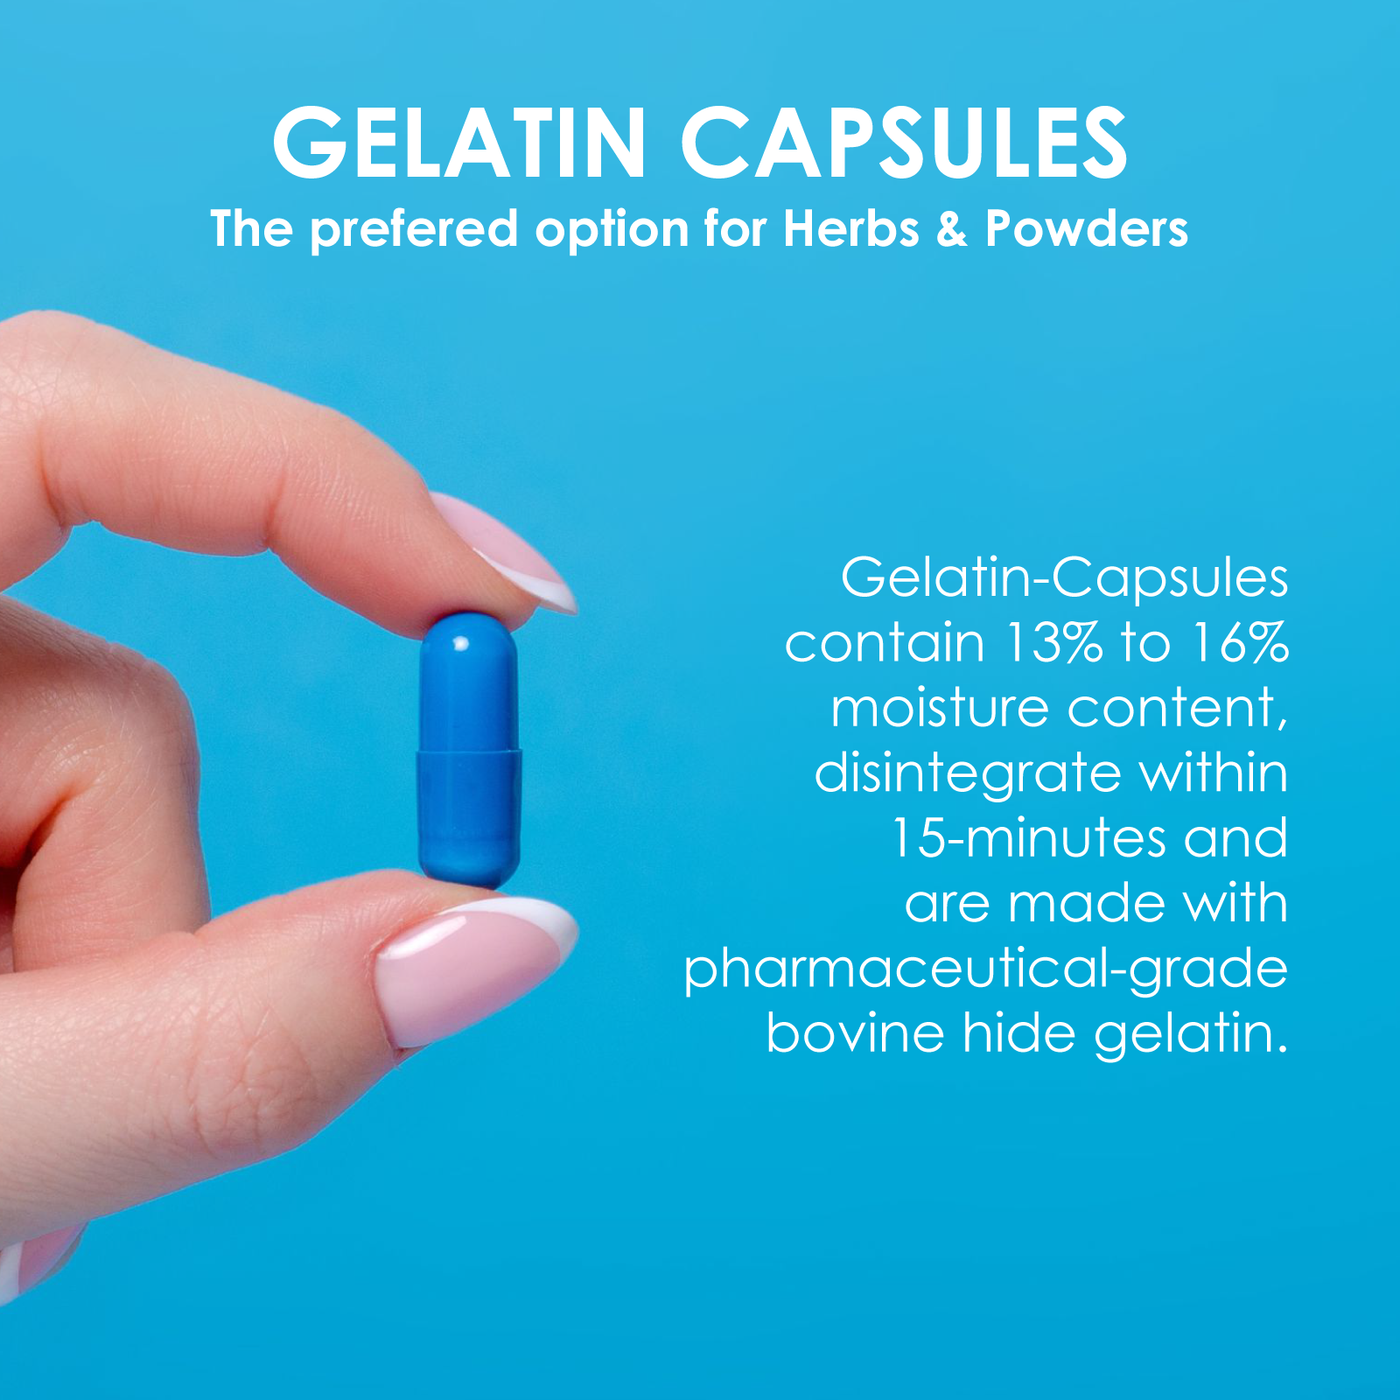 Colored Size 0 Empty Gelatin Capsules by Capsuline - Green/Green 5000 Count - 5000